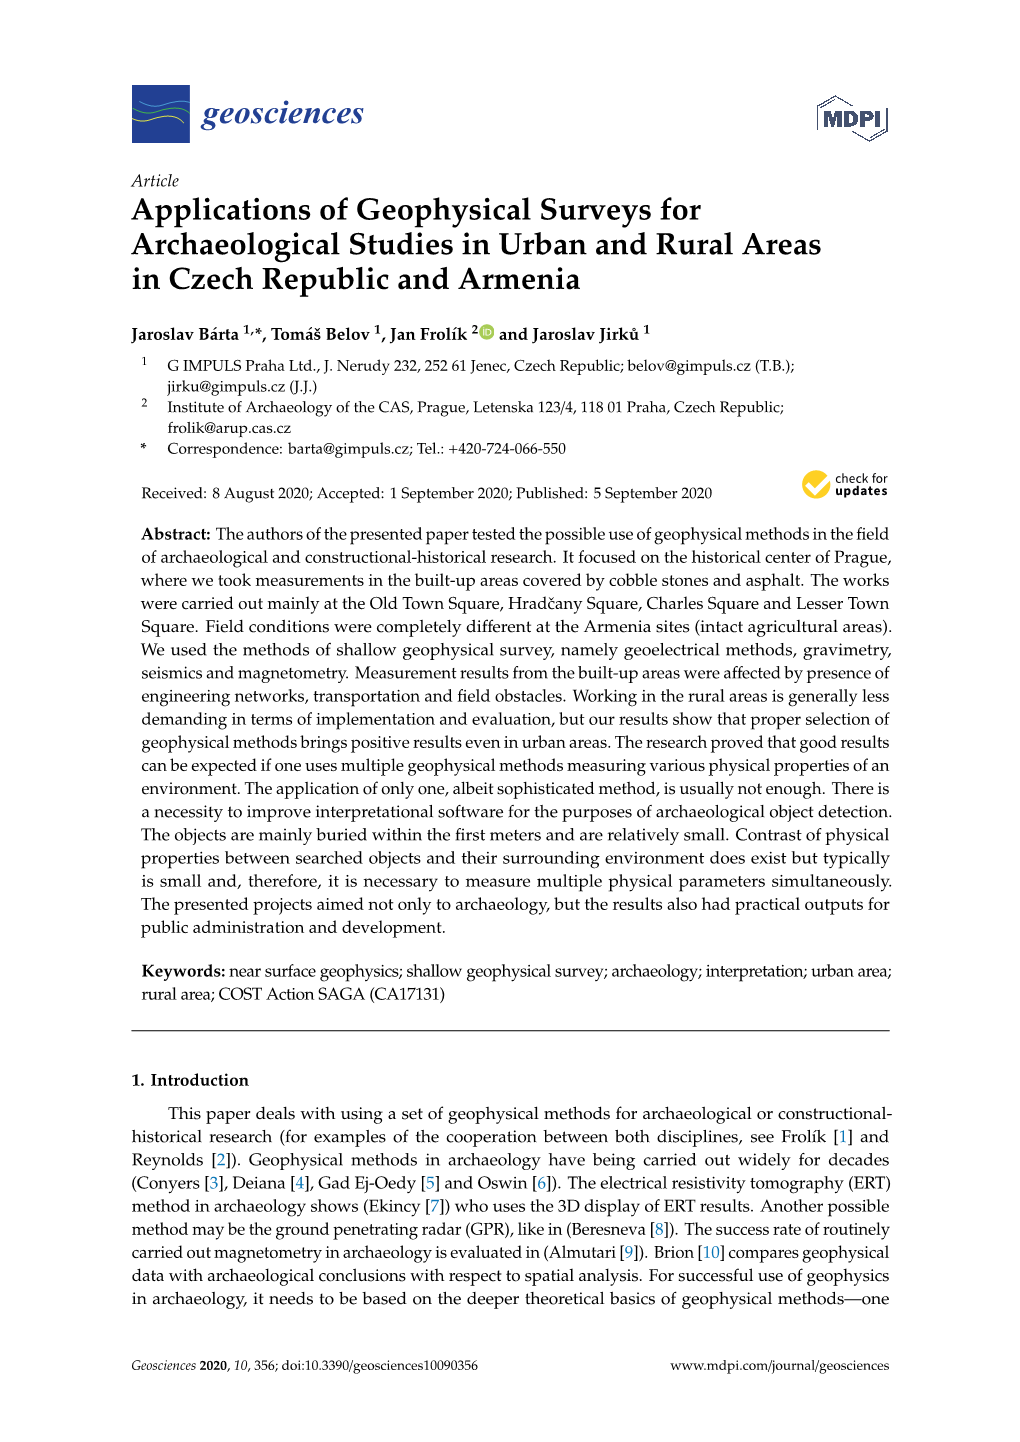 Applications of Geophysical Surveys for Archaeological Studies in Urban and Rural Areas in Czech Republic and Armenia